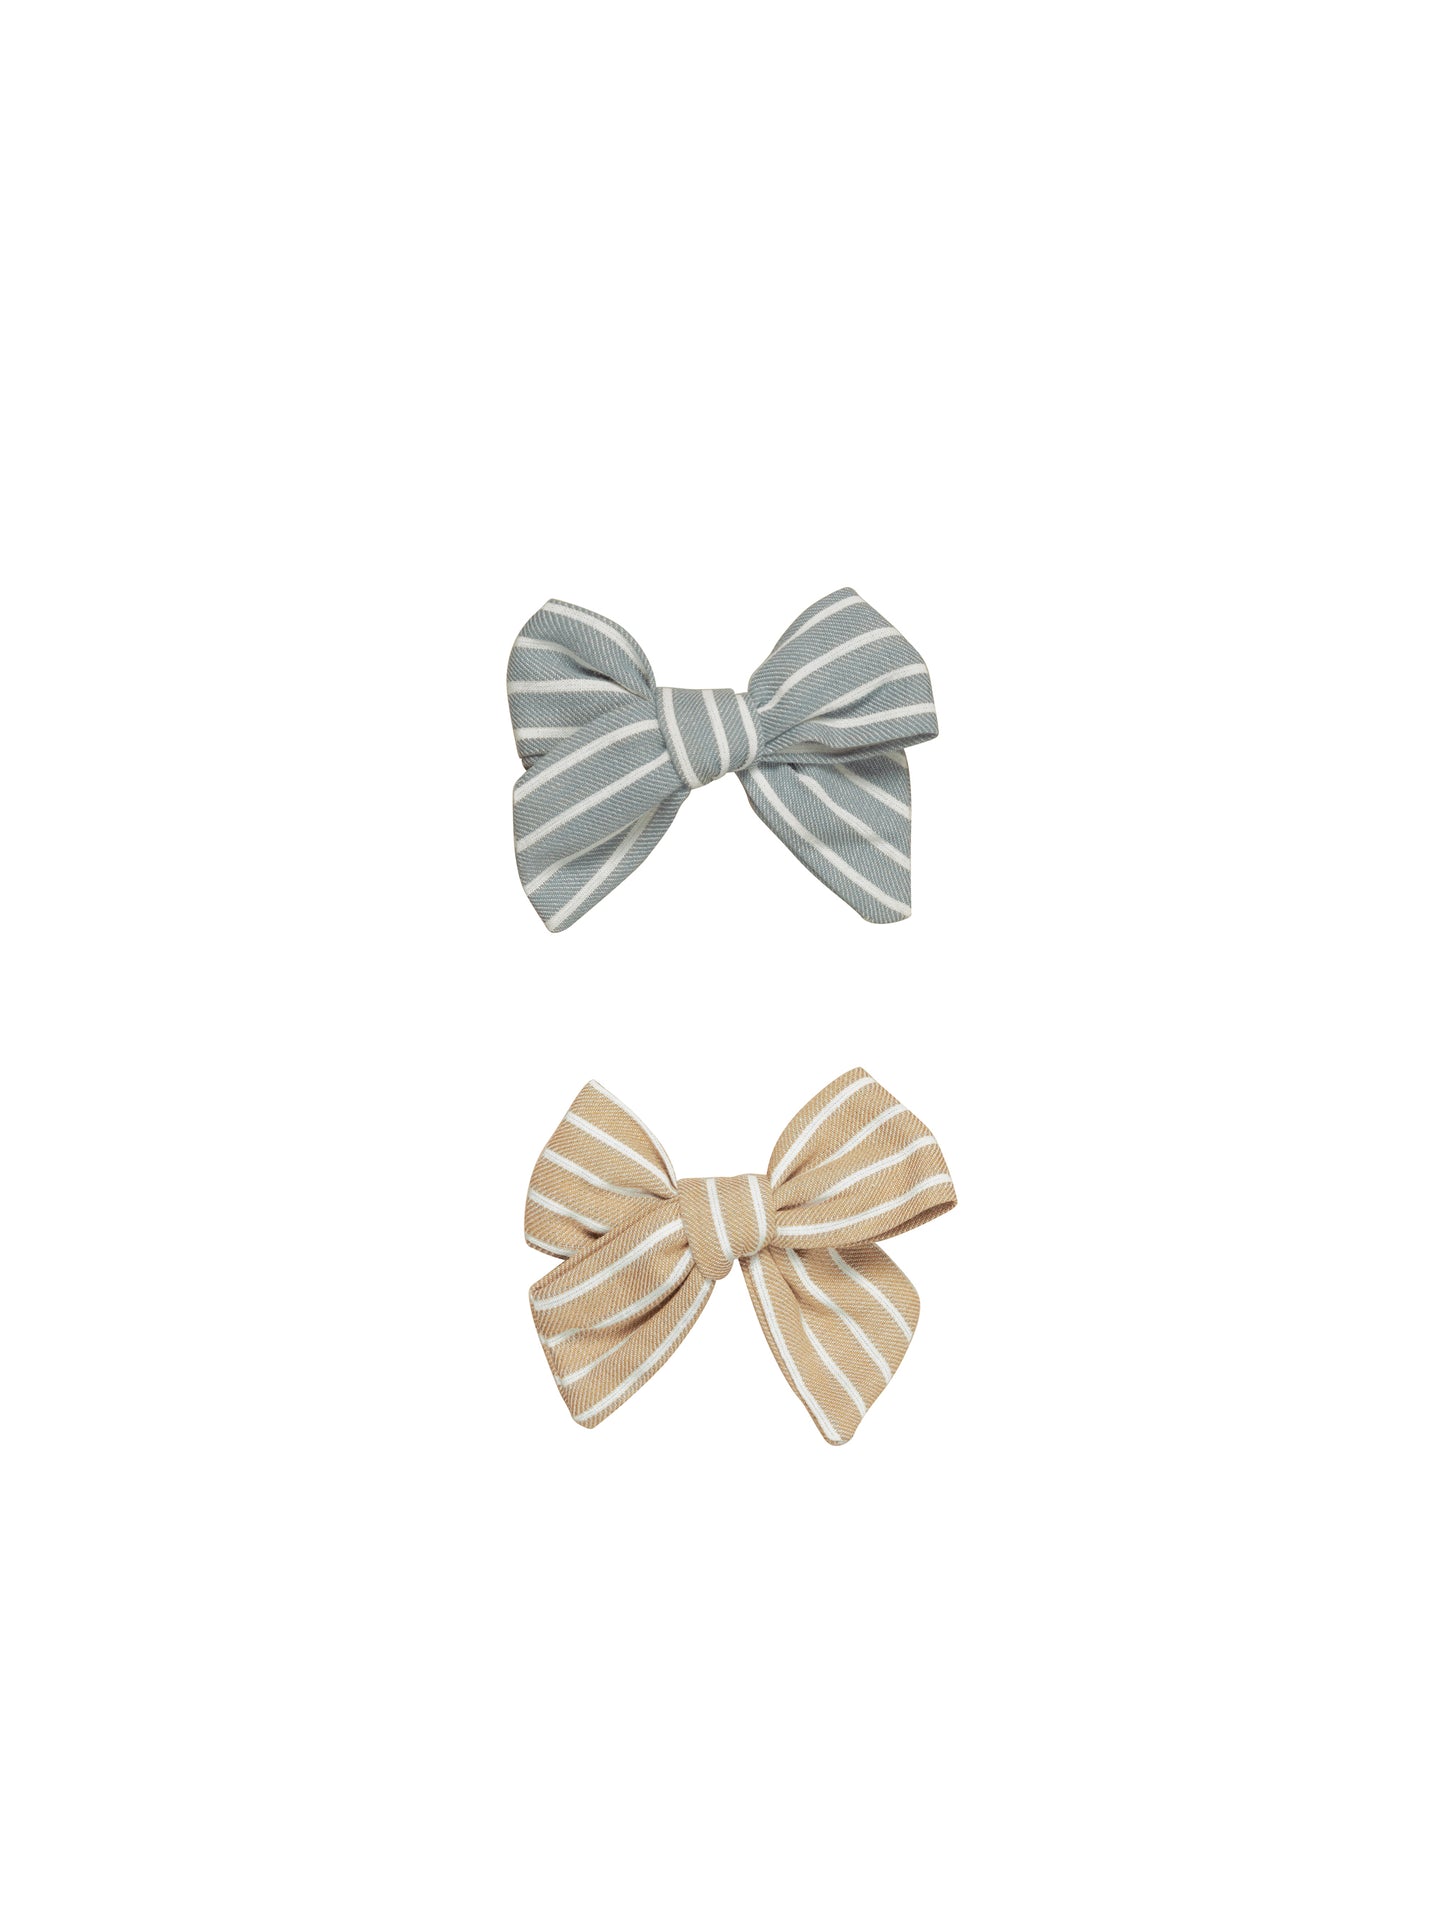 Huxbaby Stripe 2 Pack Hair Bow Teal + Biscuit